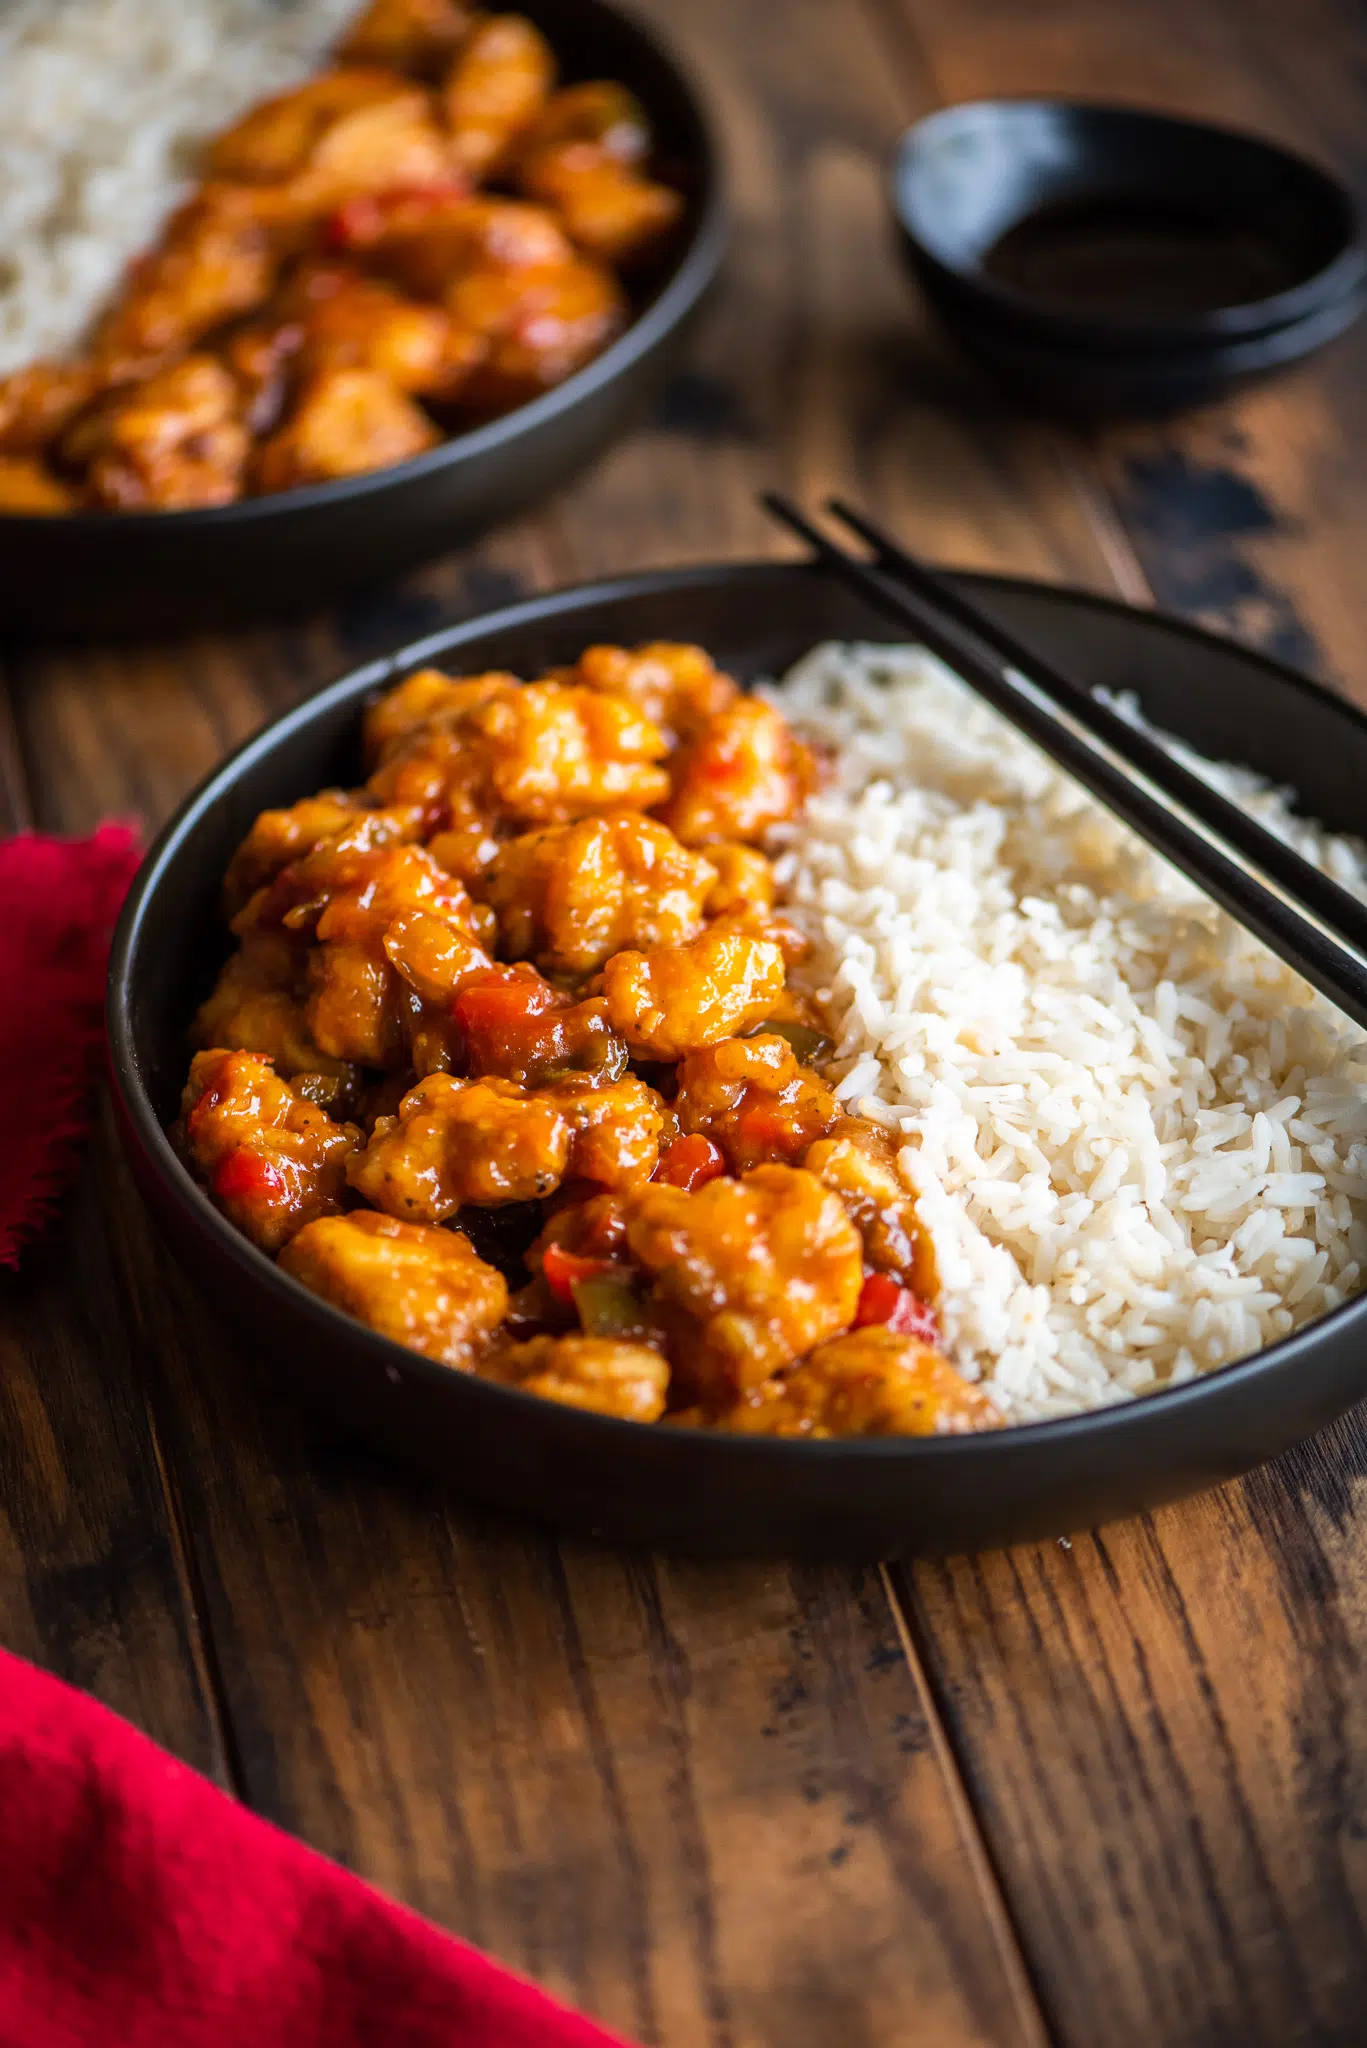 Easy Sweet & Sour Chicken